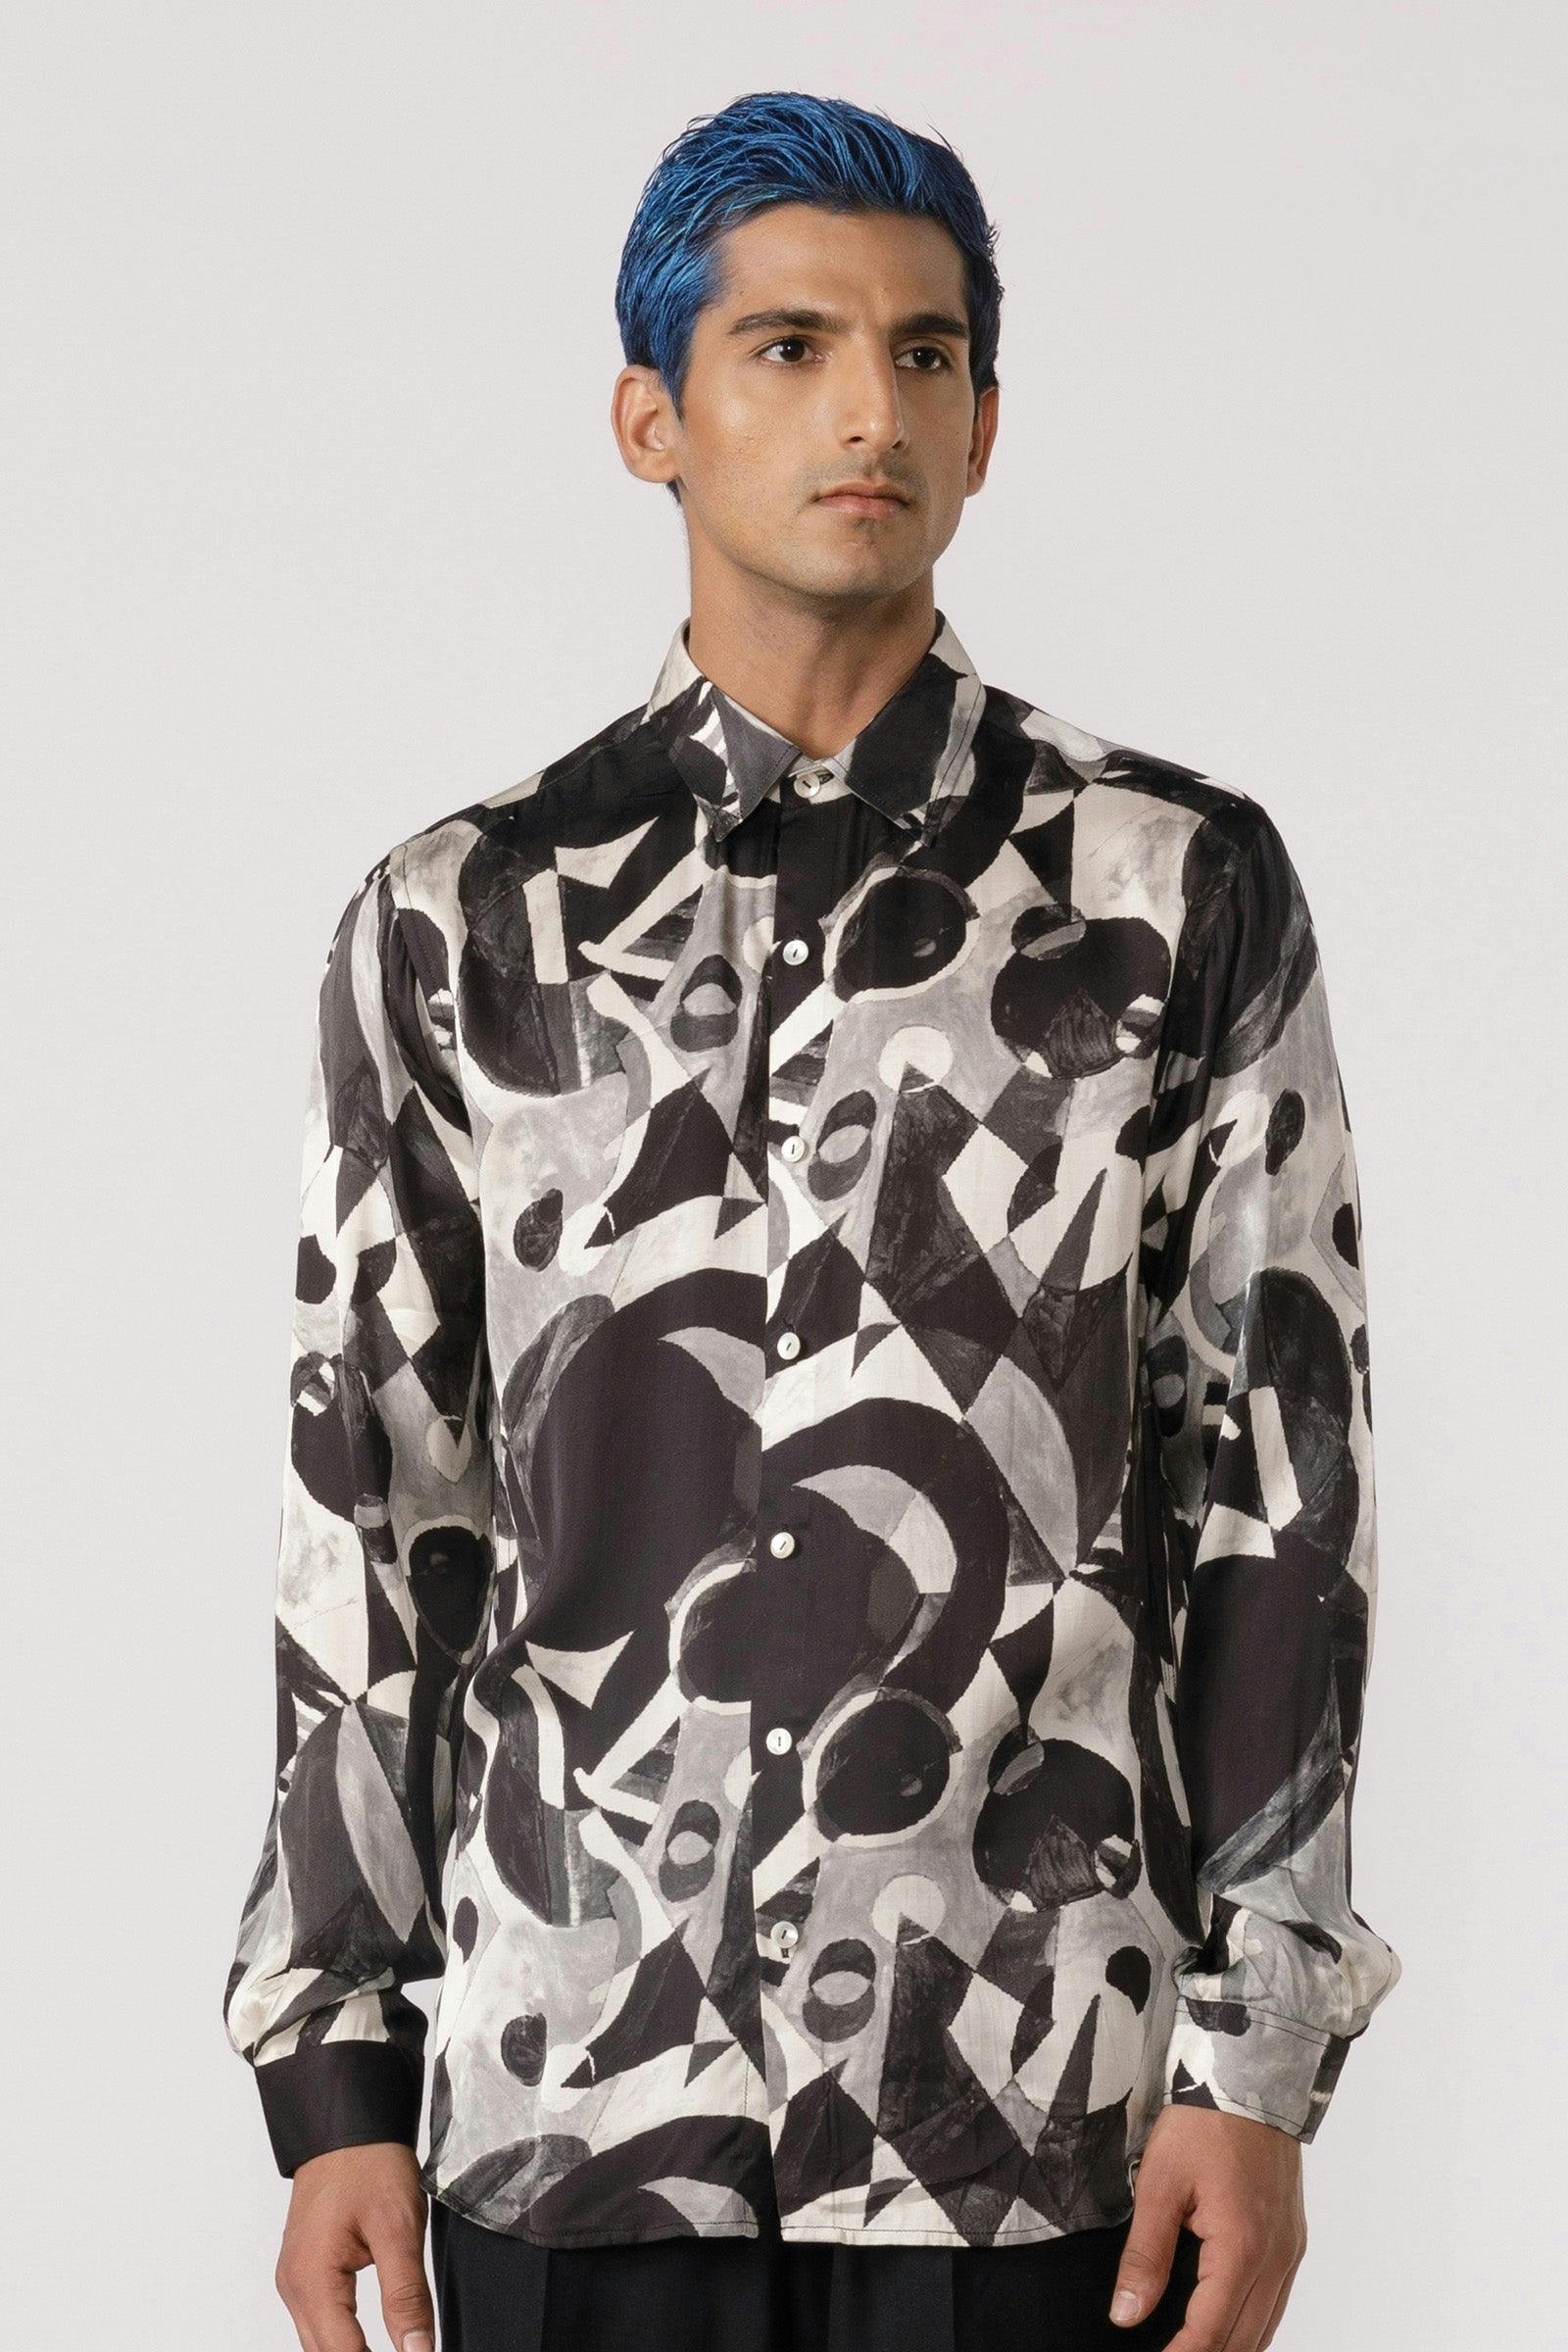 Abstract black and white printed shirt, a product by Line Outline